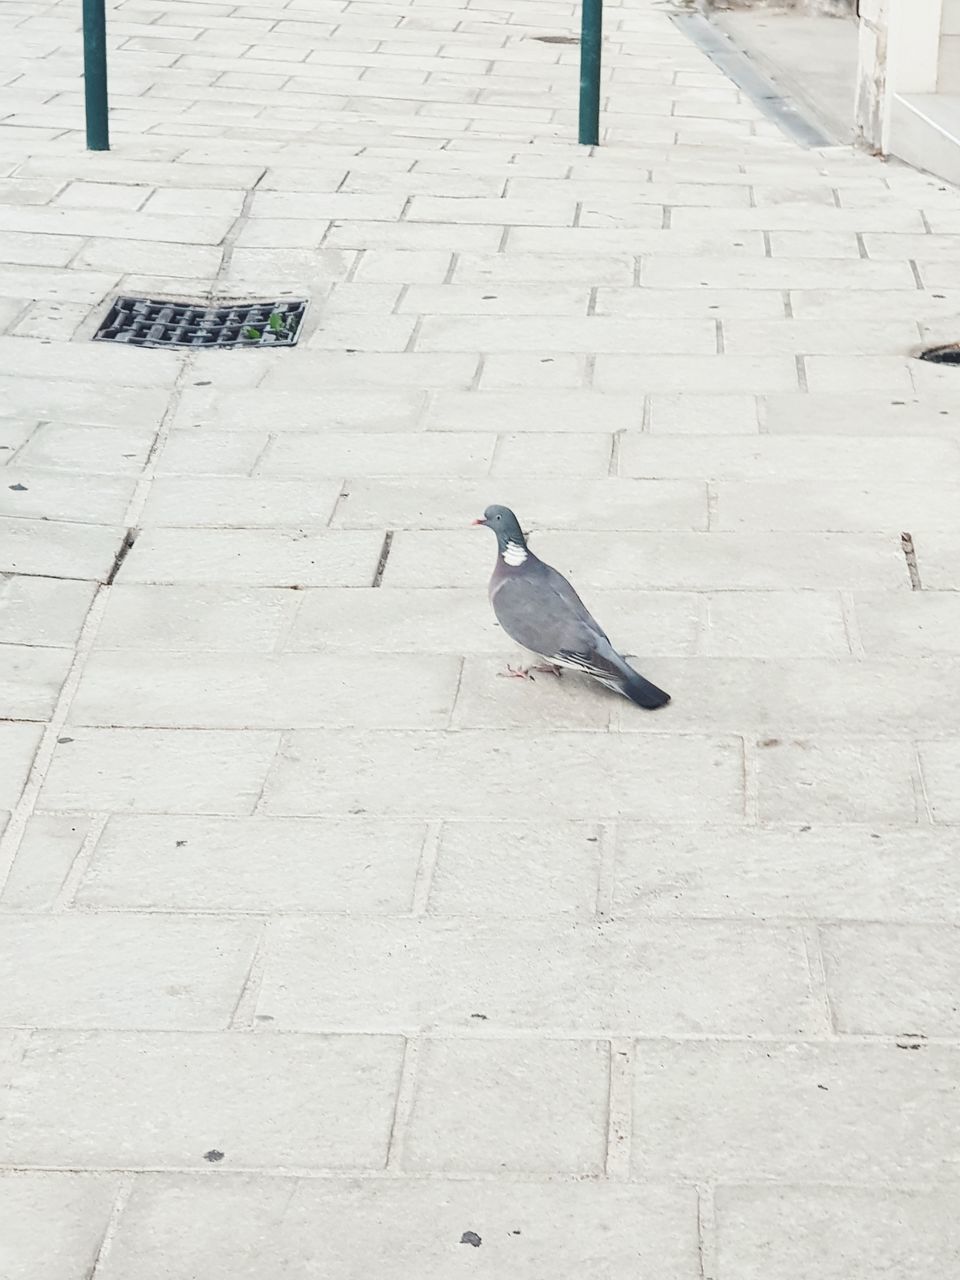 HIGH ANGLE VIEW OF PIGEONS ON FOOTPATH